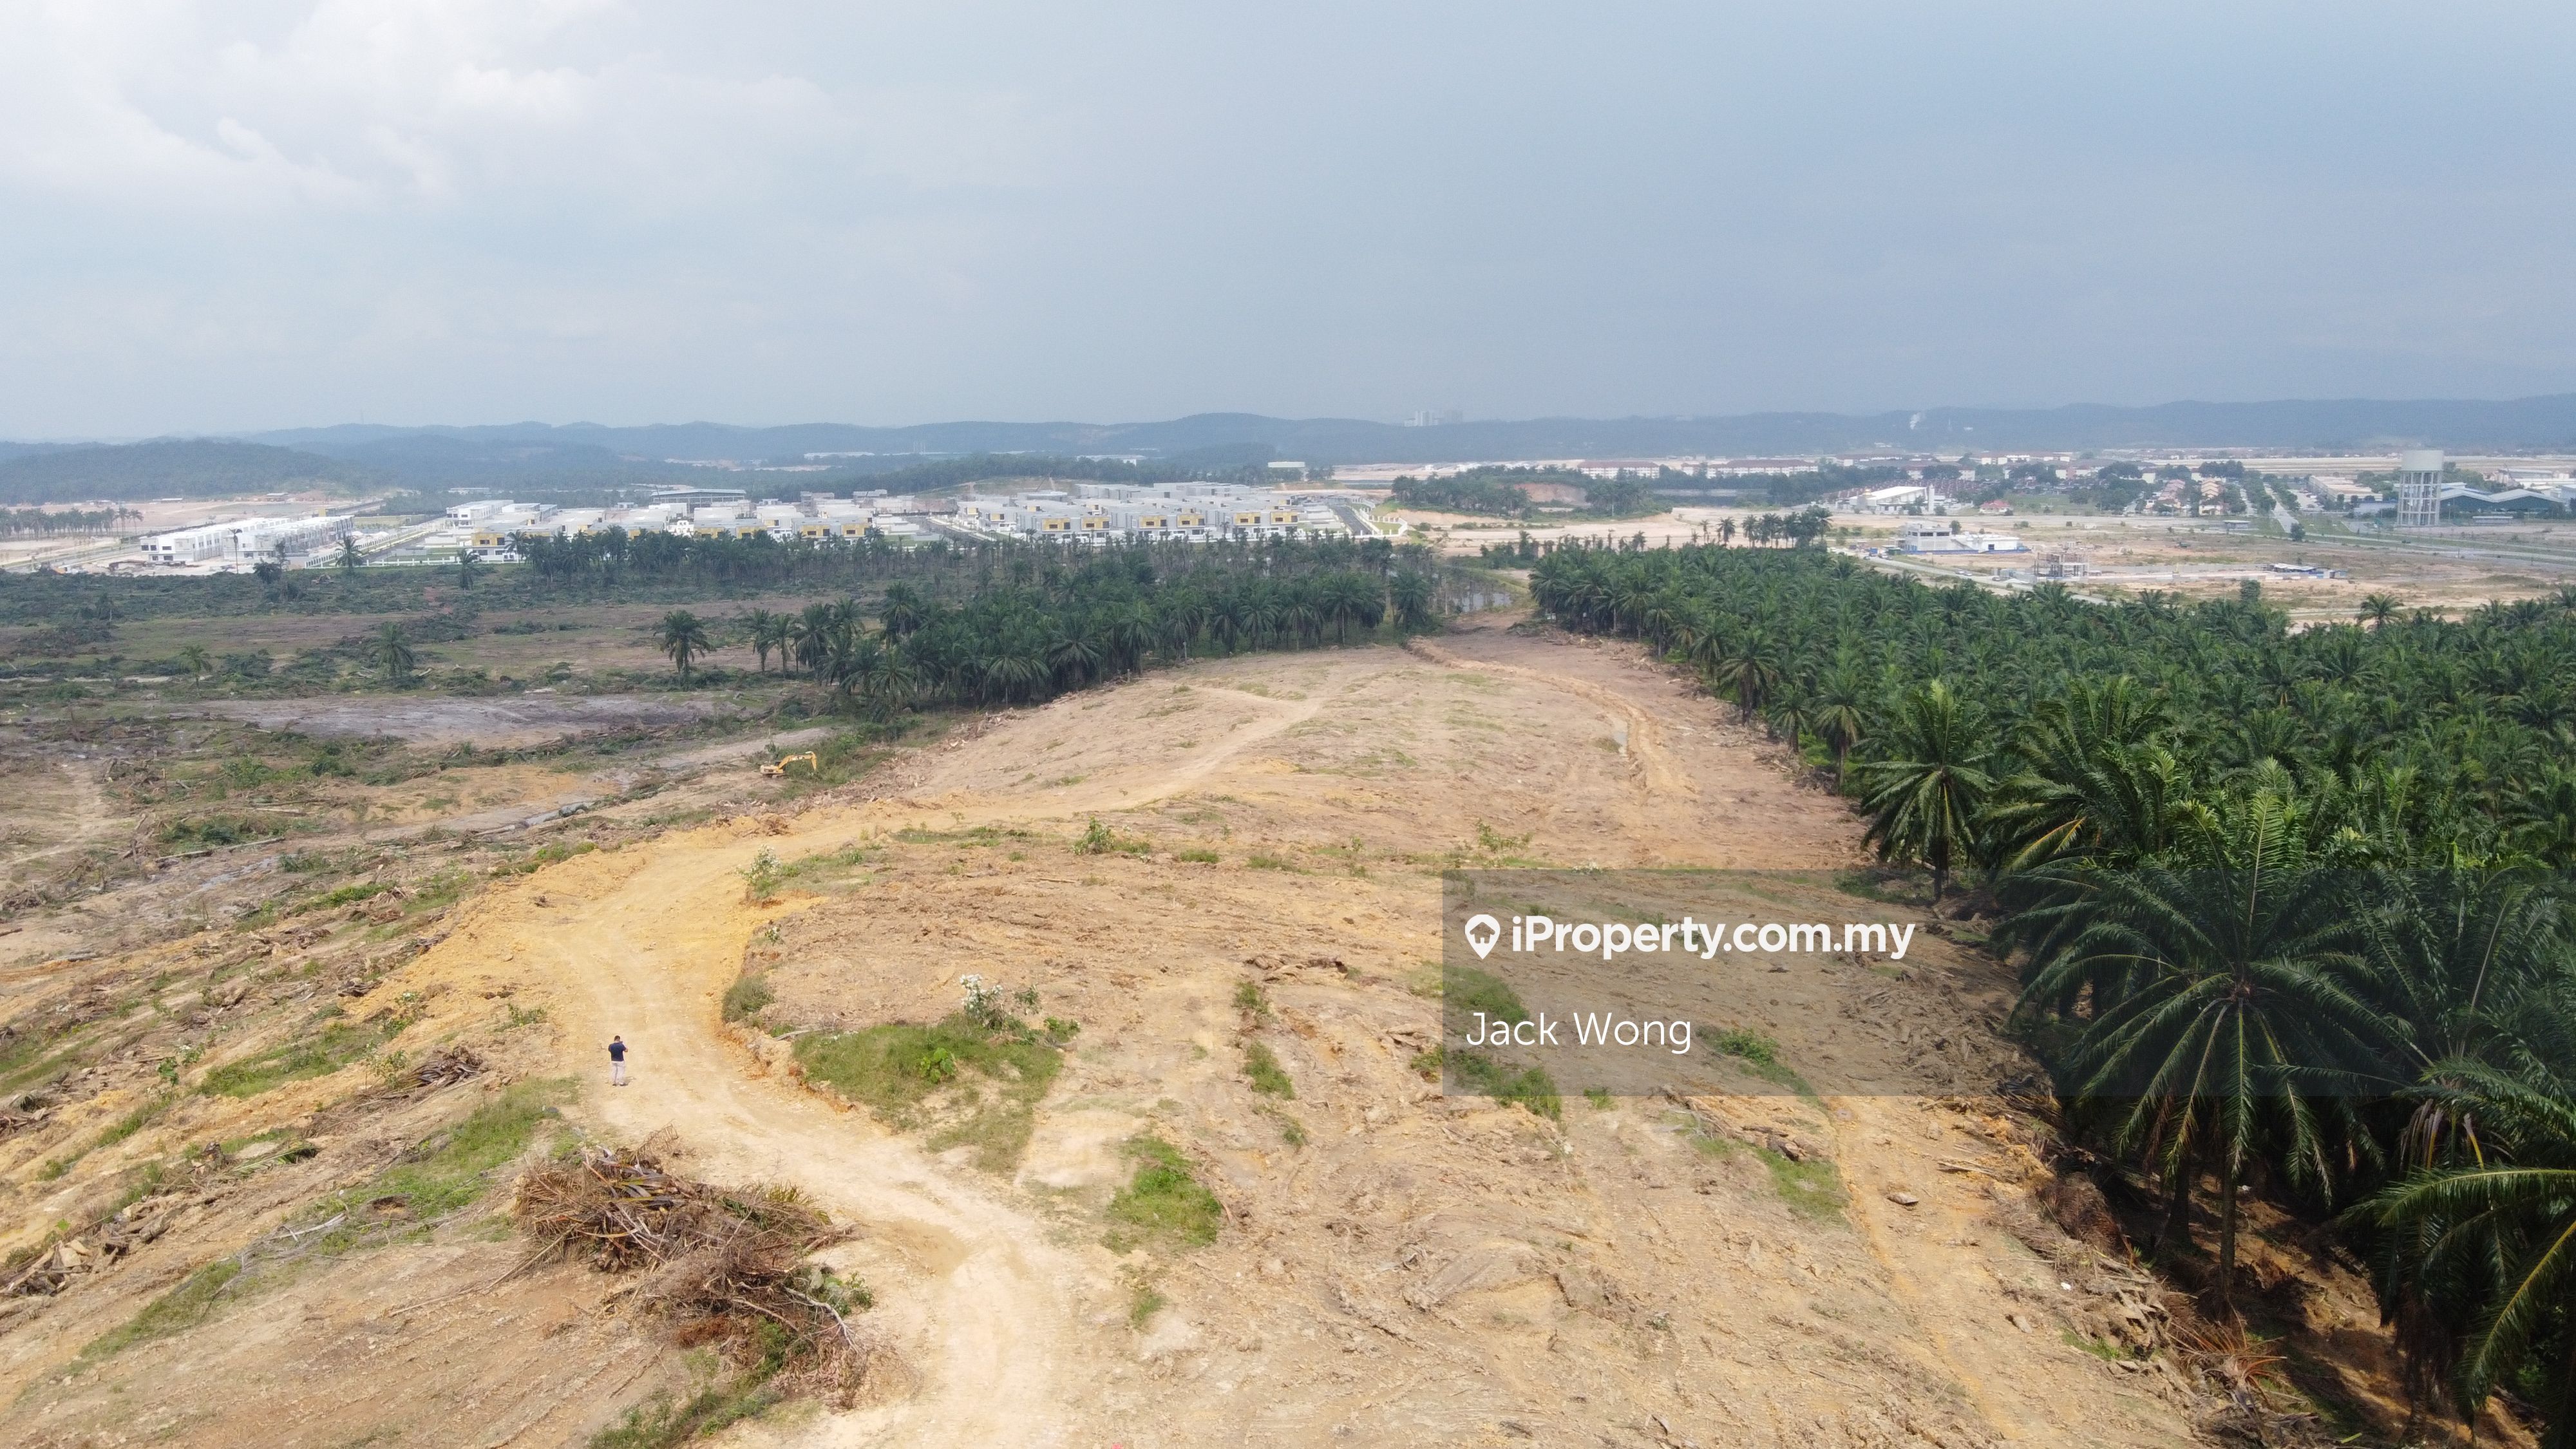 Shah Alam Industrial Land for sale  iProperty.com.my